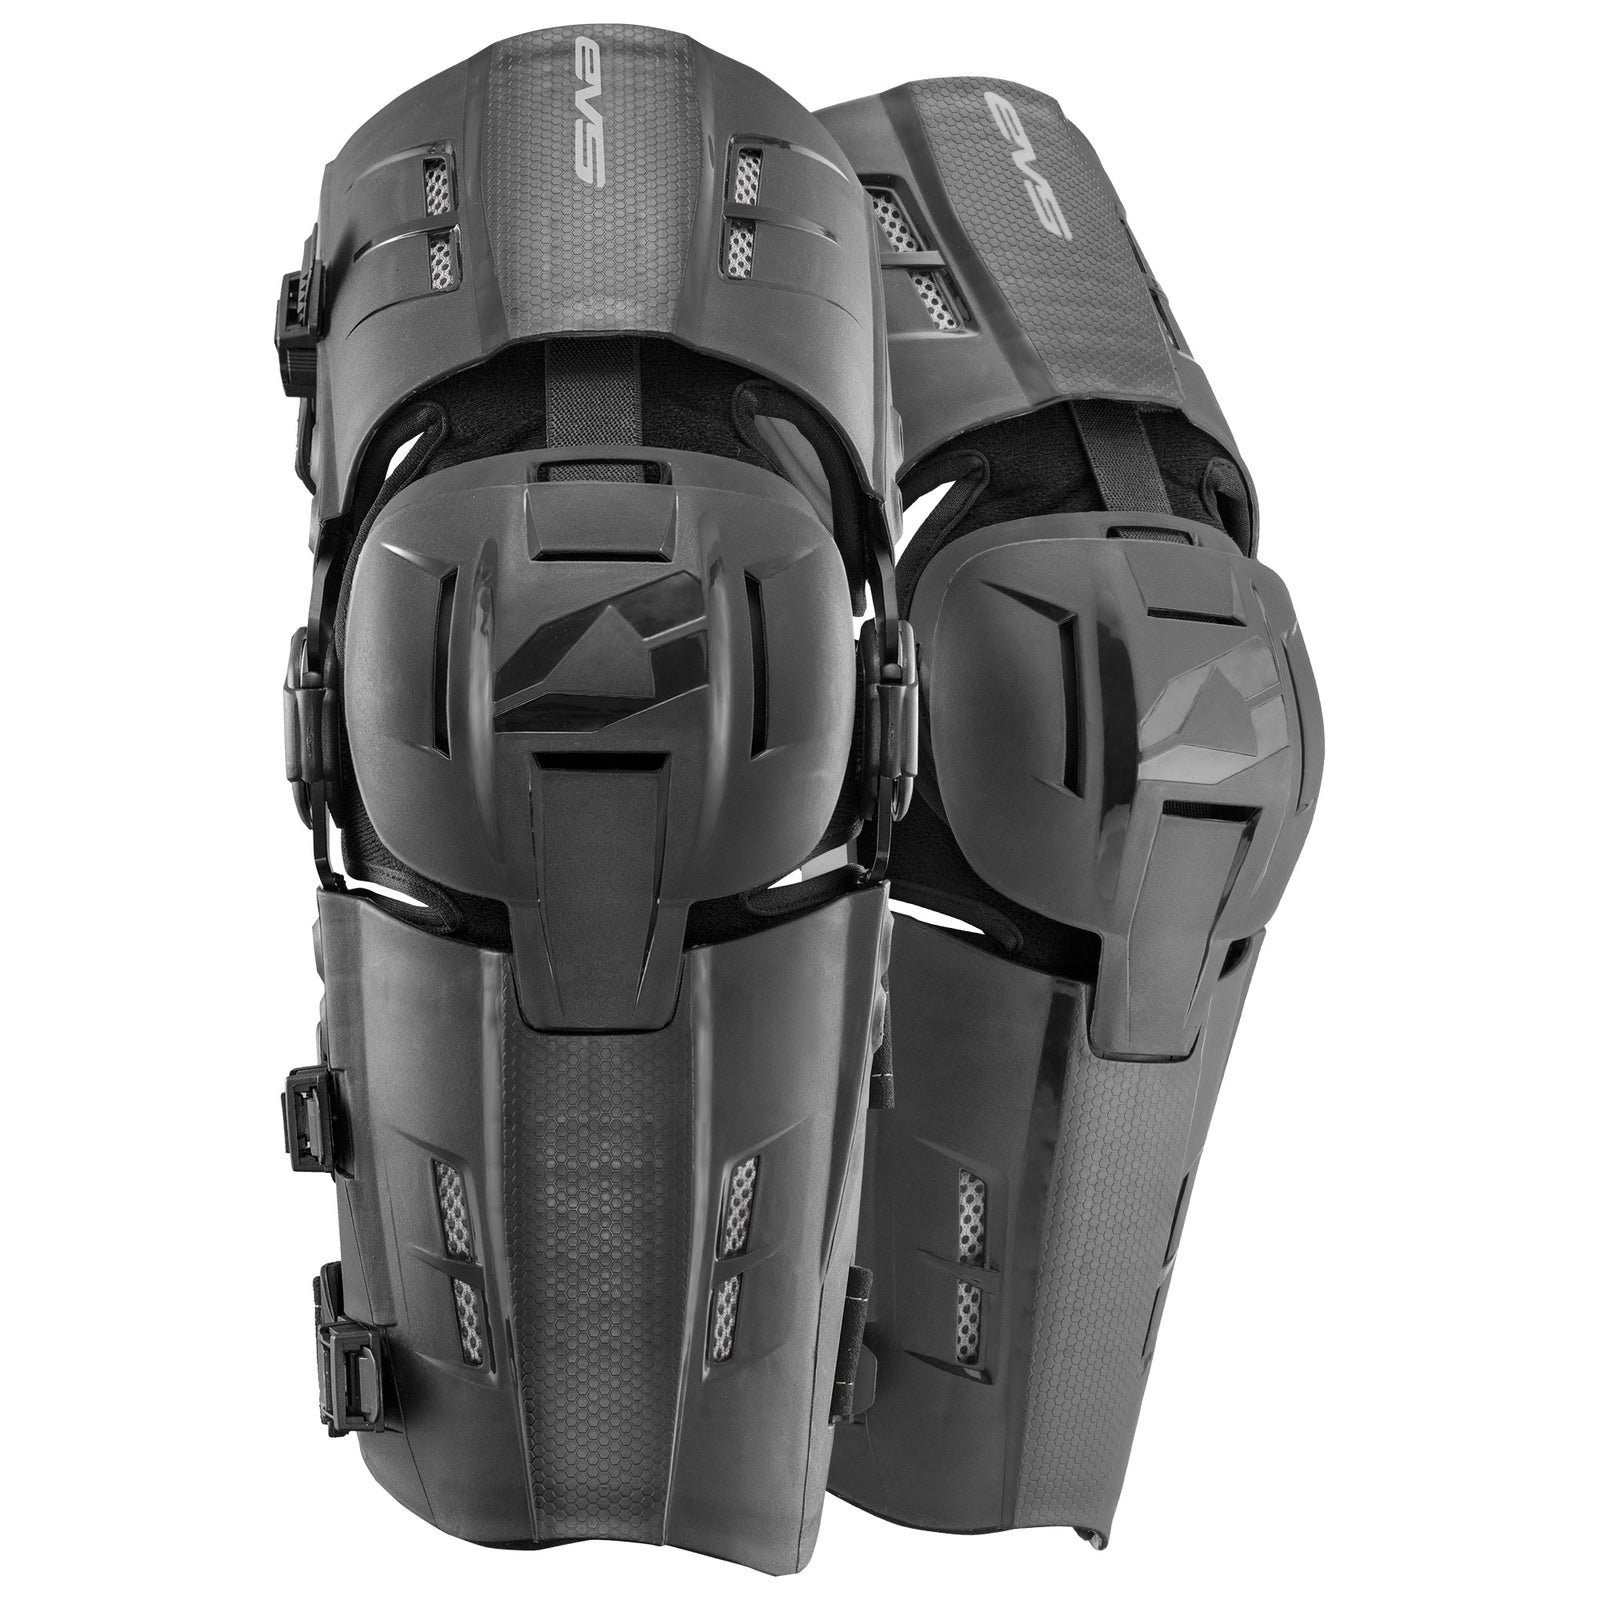 Meet the All New RS8 PRO Knee Brace from EVS Sports!